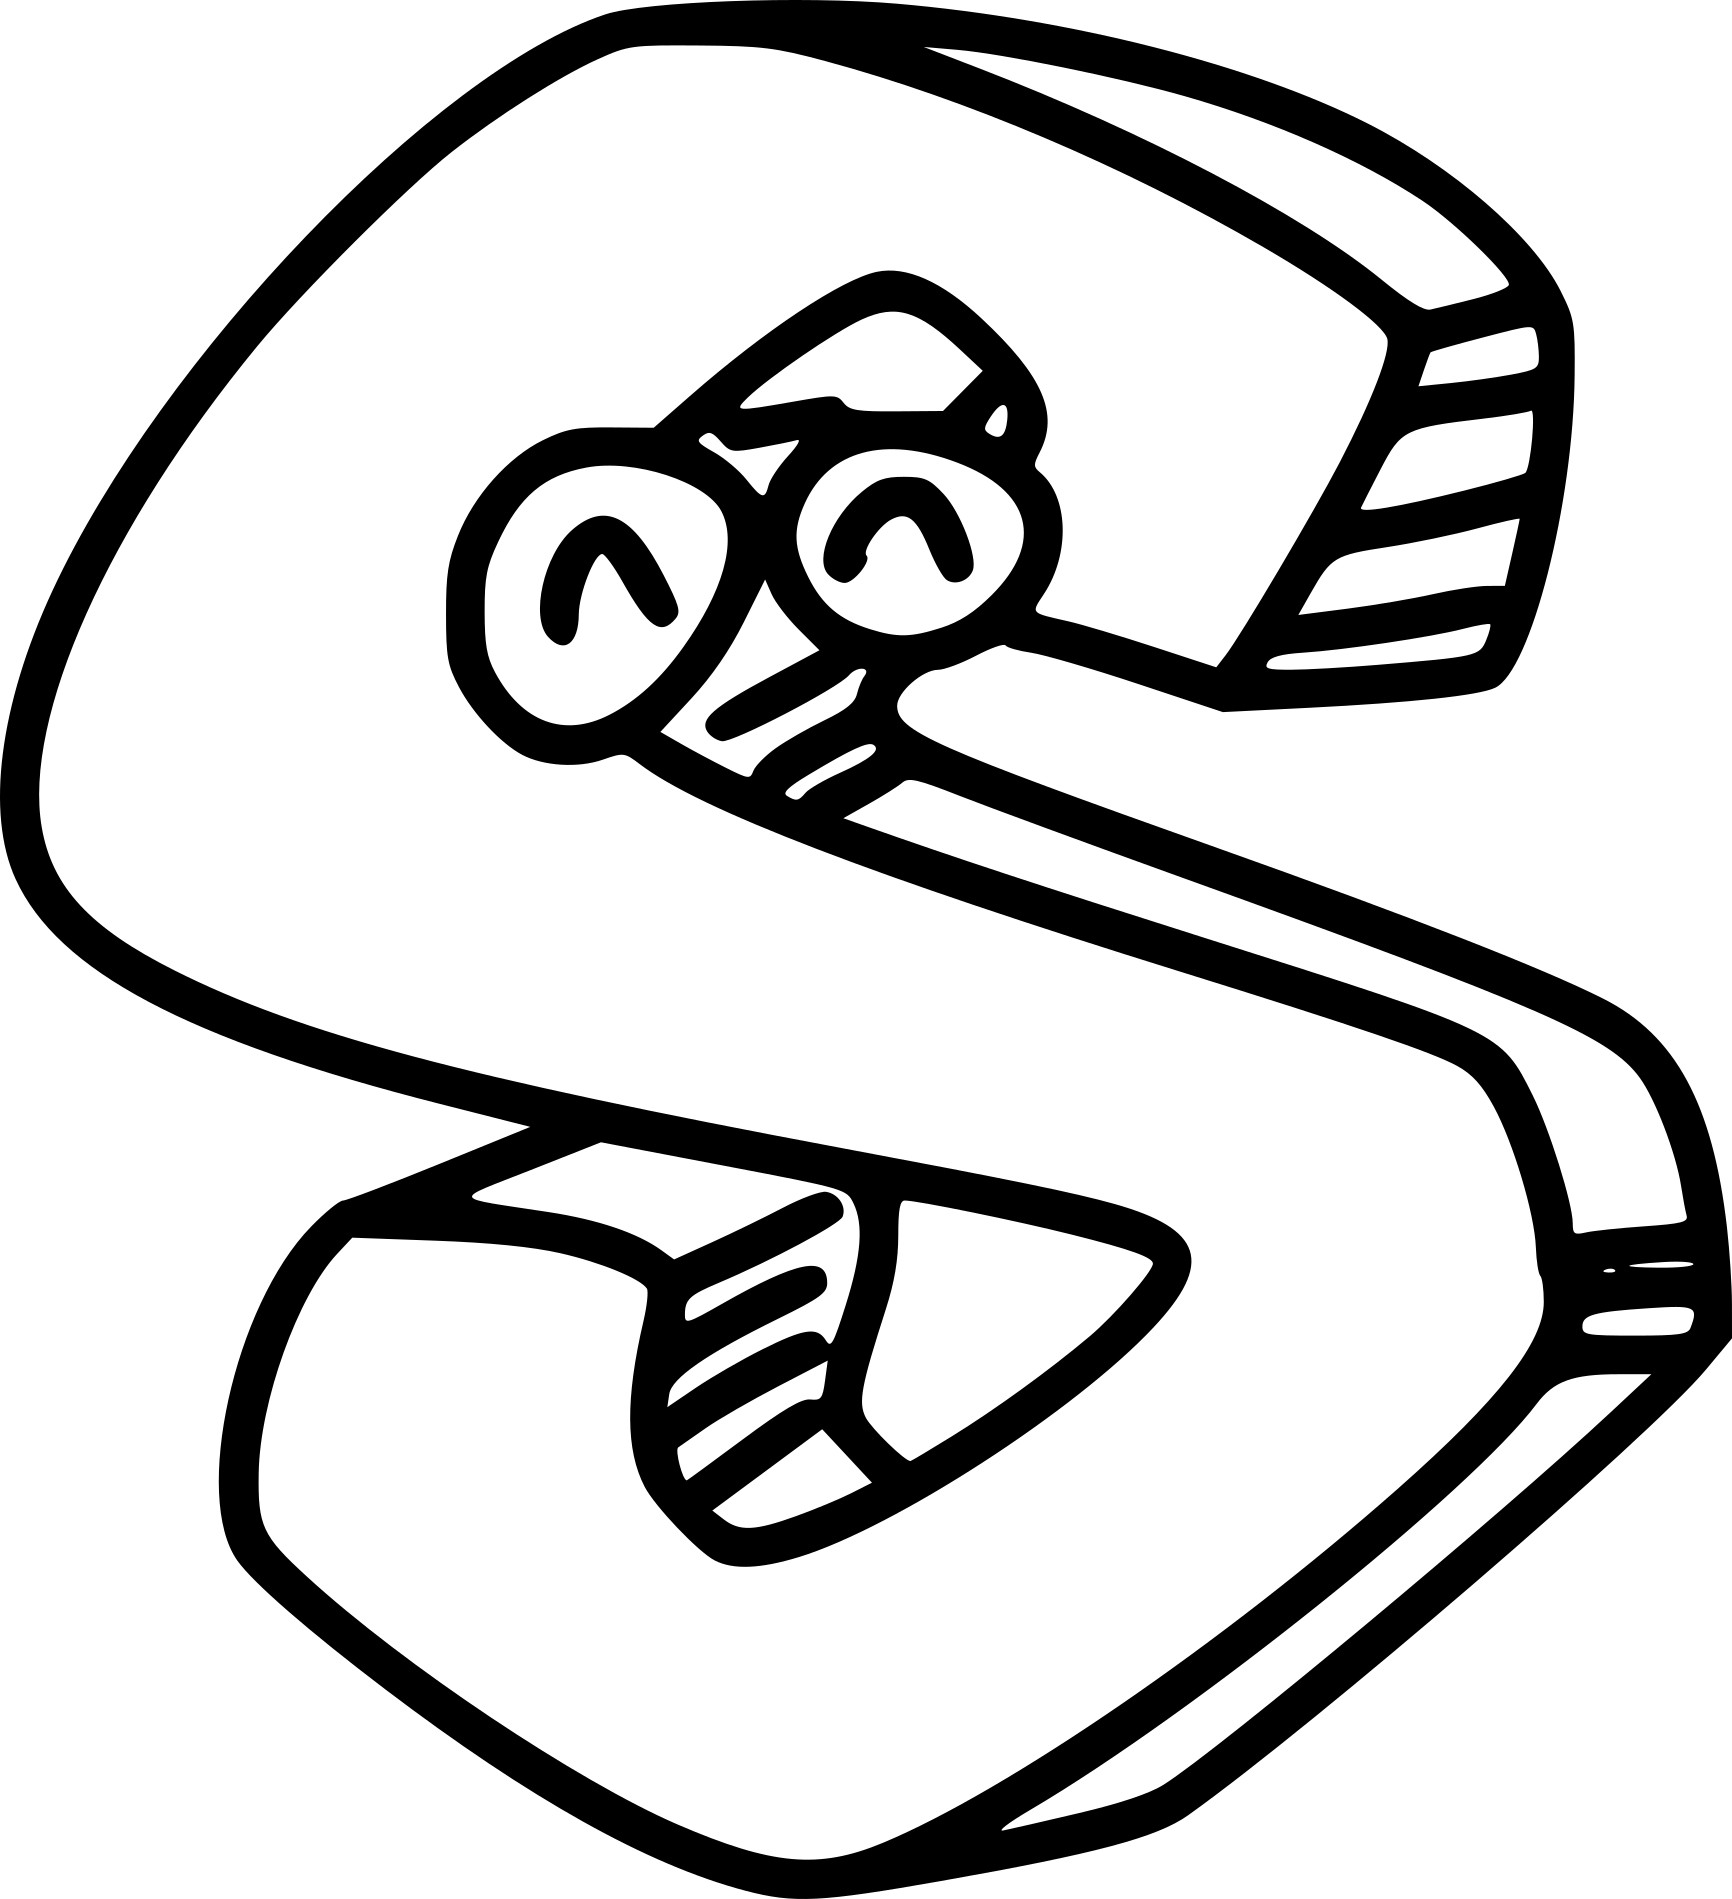 Letter S coloring page